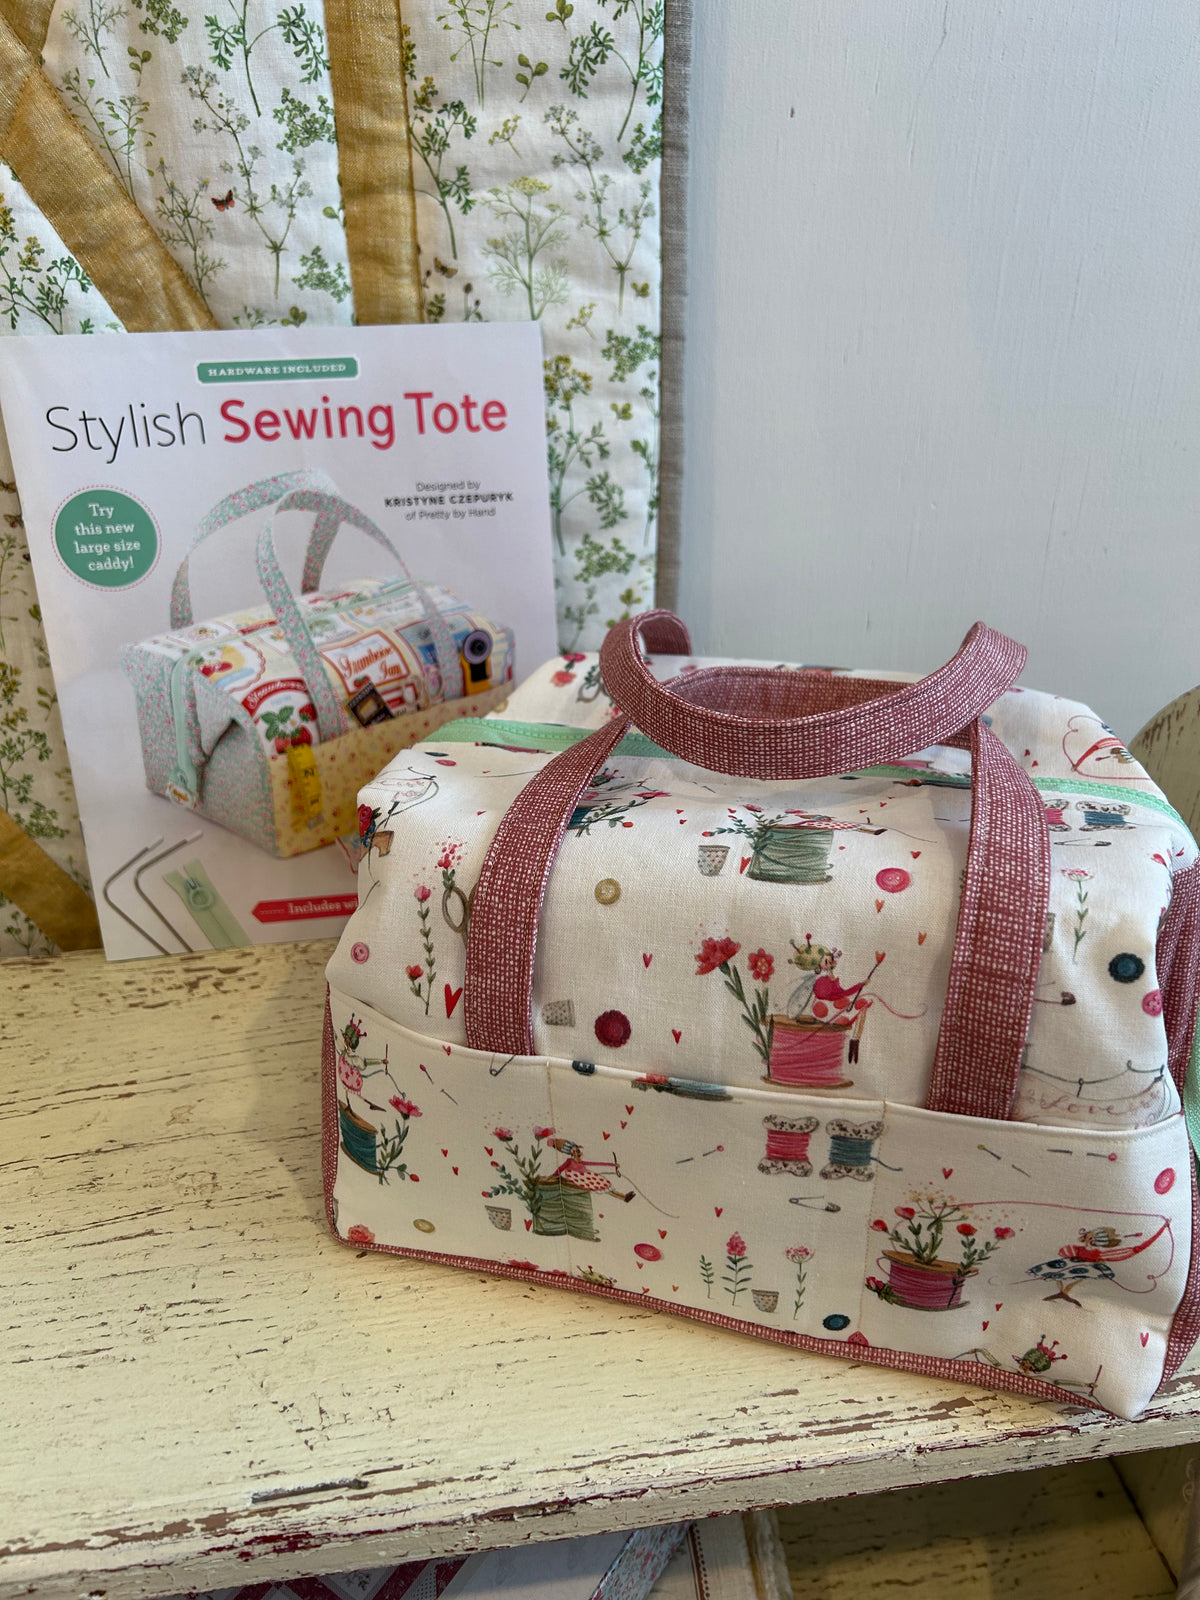 Stylish Sewing Tote FULL KIT: WITH fabric, Pattern, Clasp &amp; Zipper